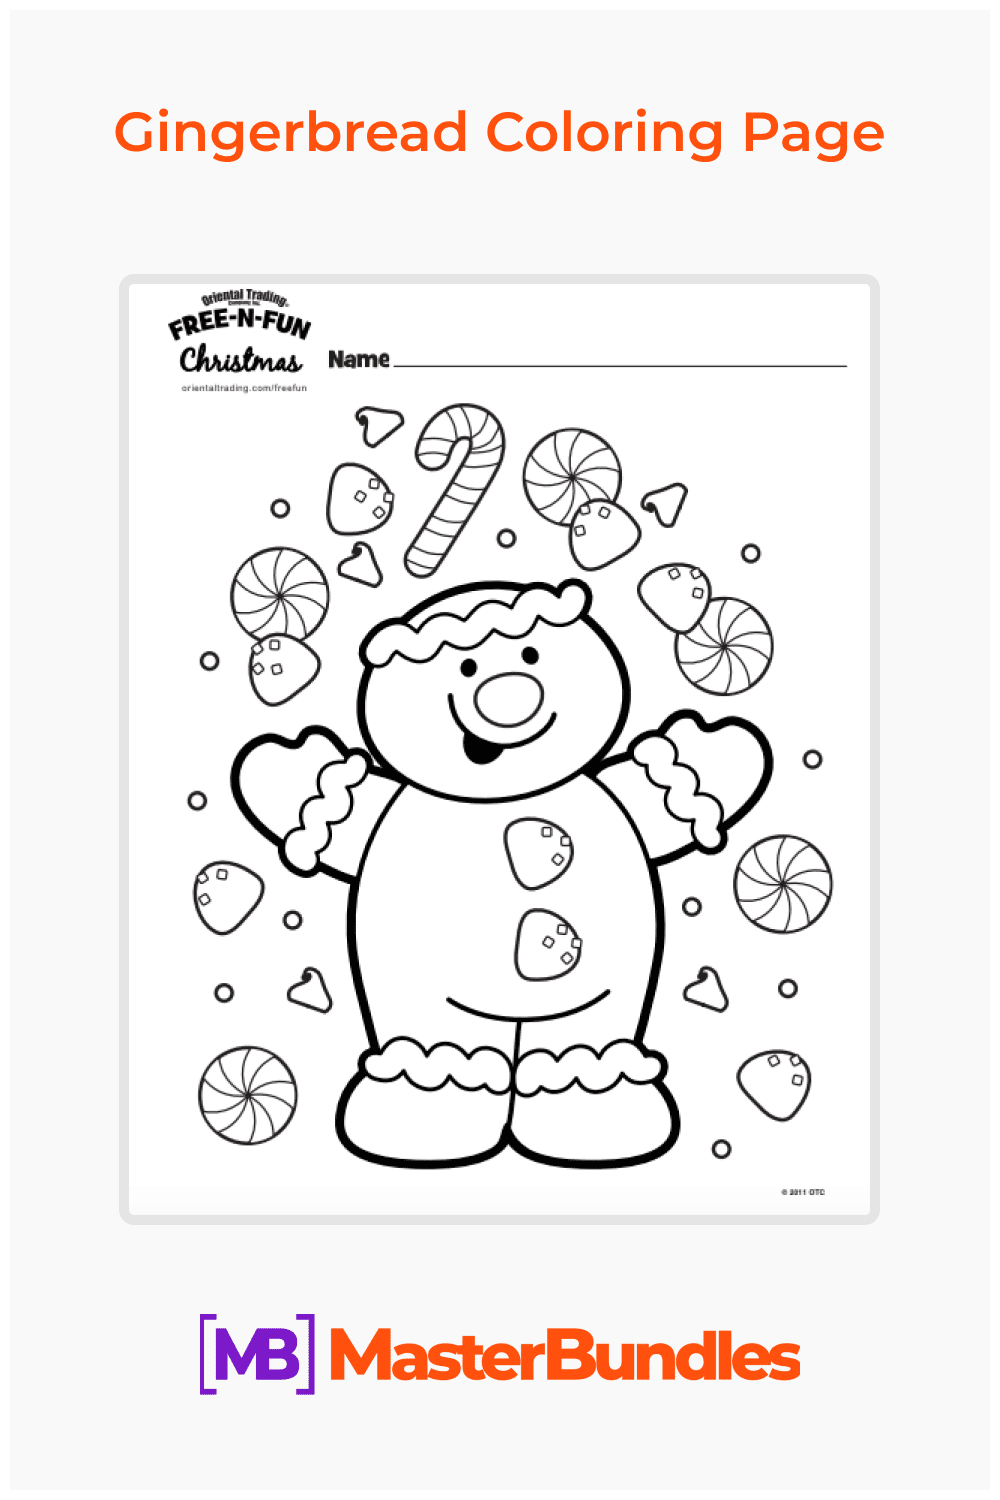 Gingerbread coloring page pinterest image.